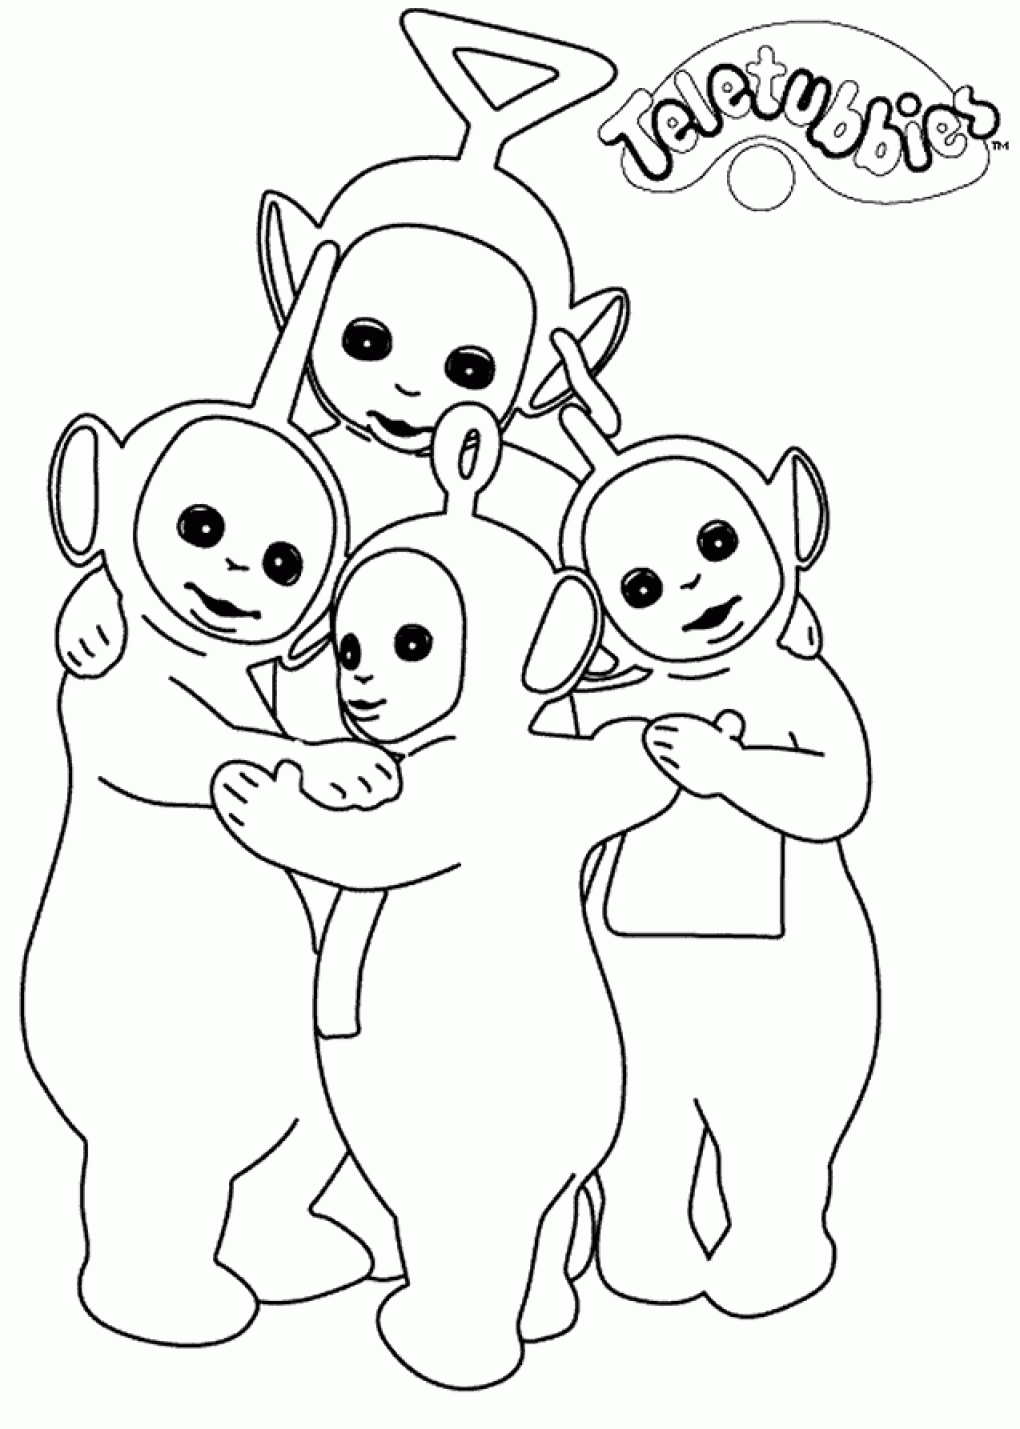 Teletubbies Coloring Pages TV Film Teletubbies Printable 2020 08487 Coloring4free